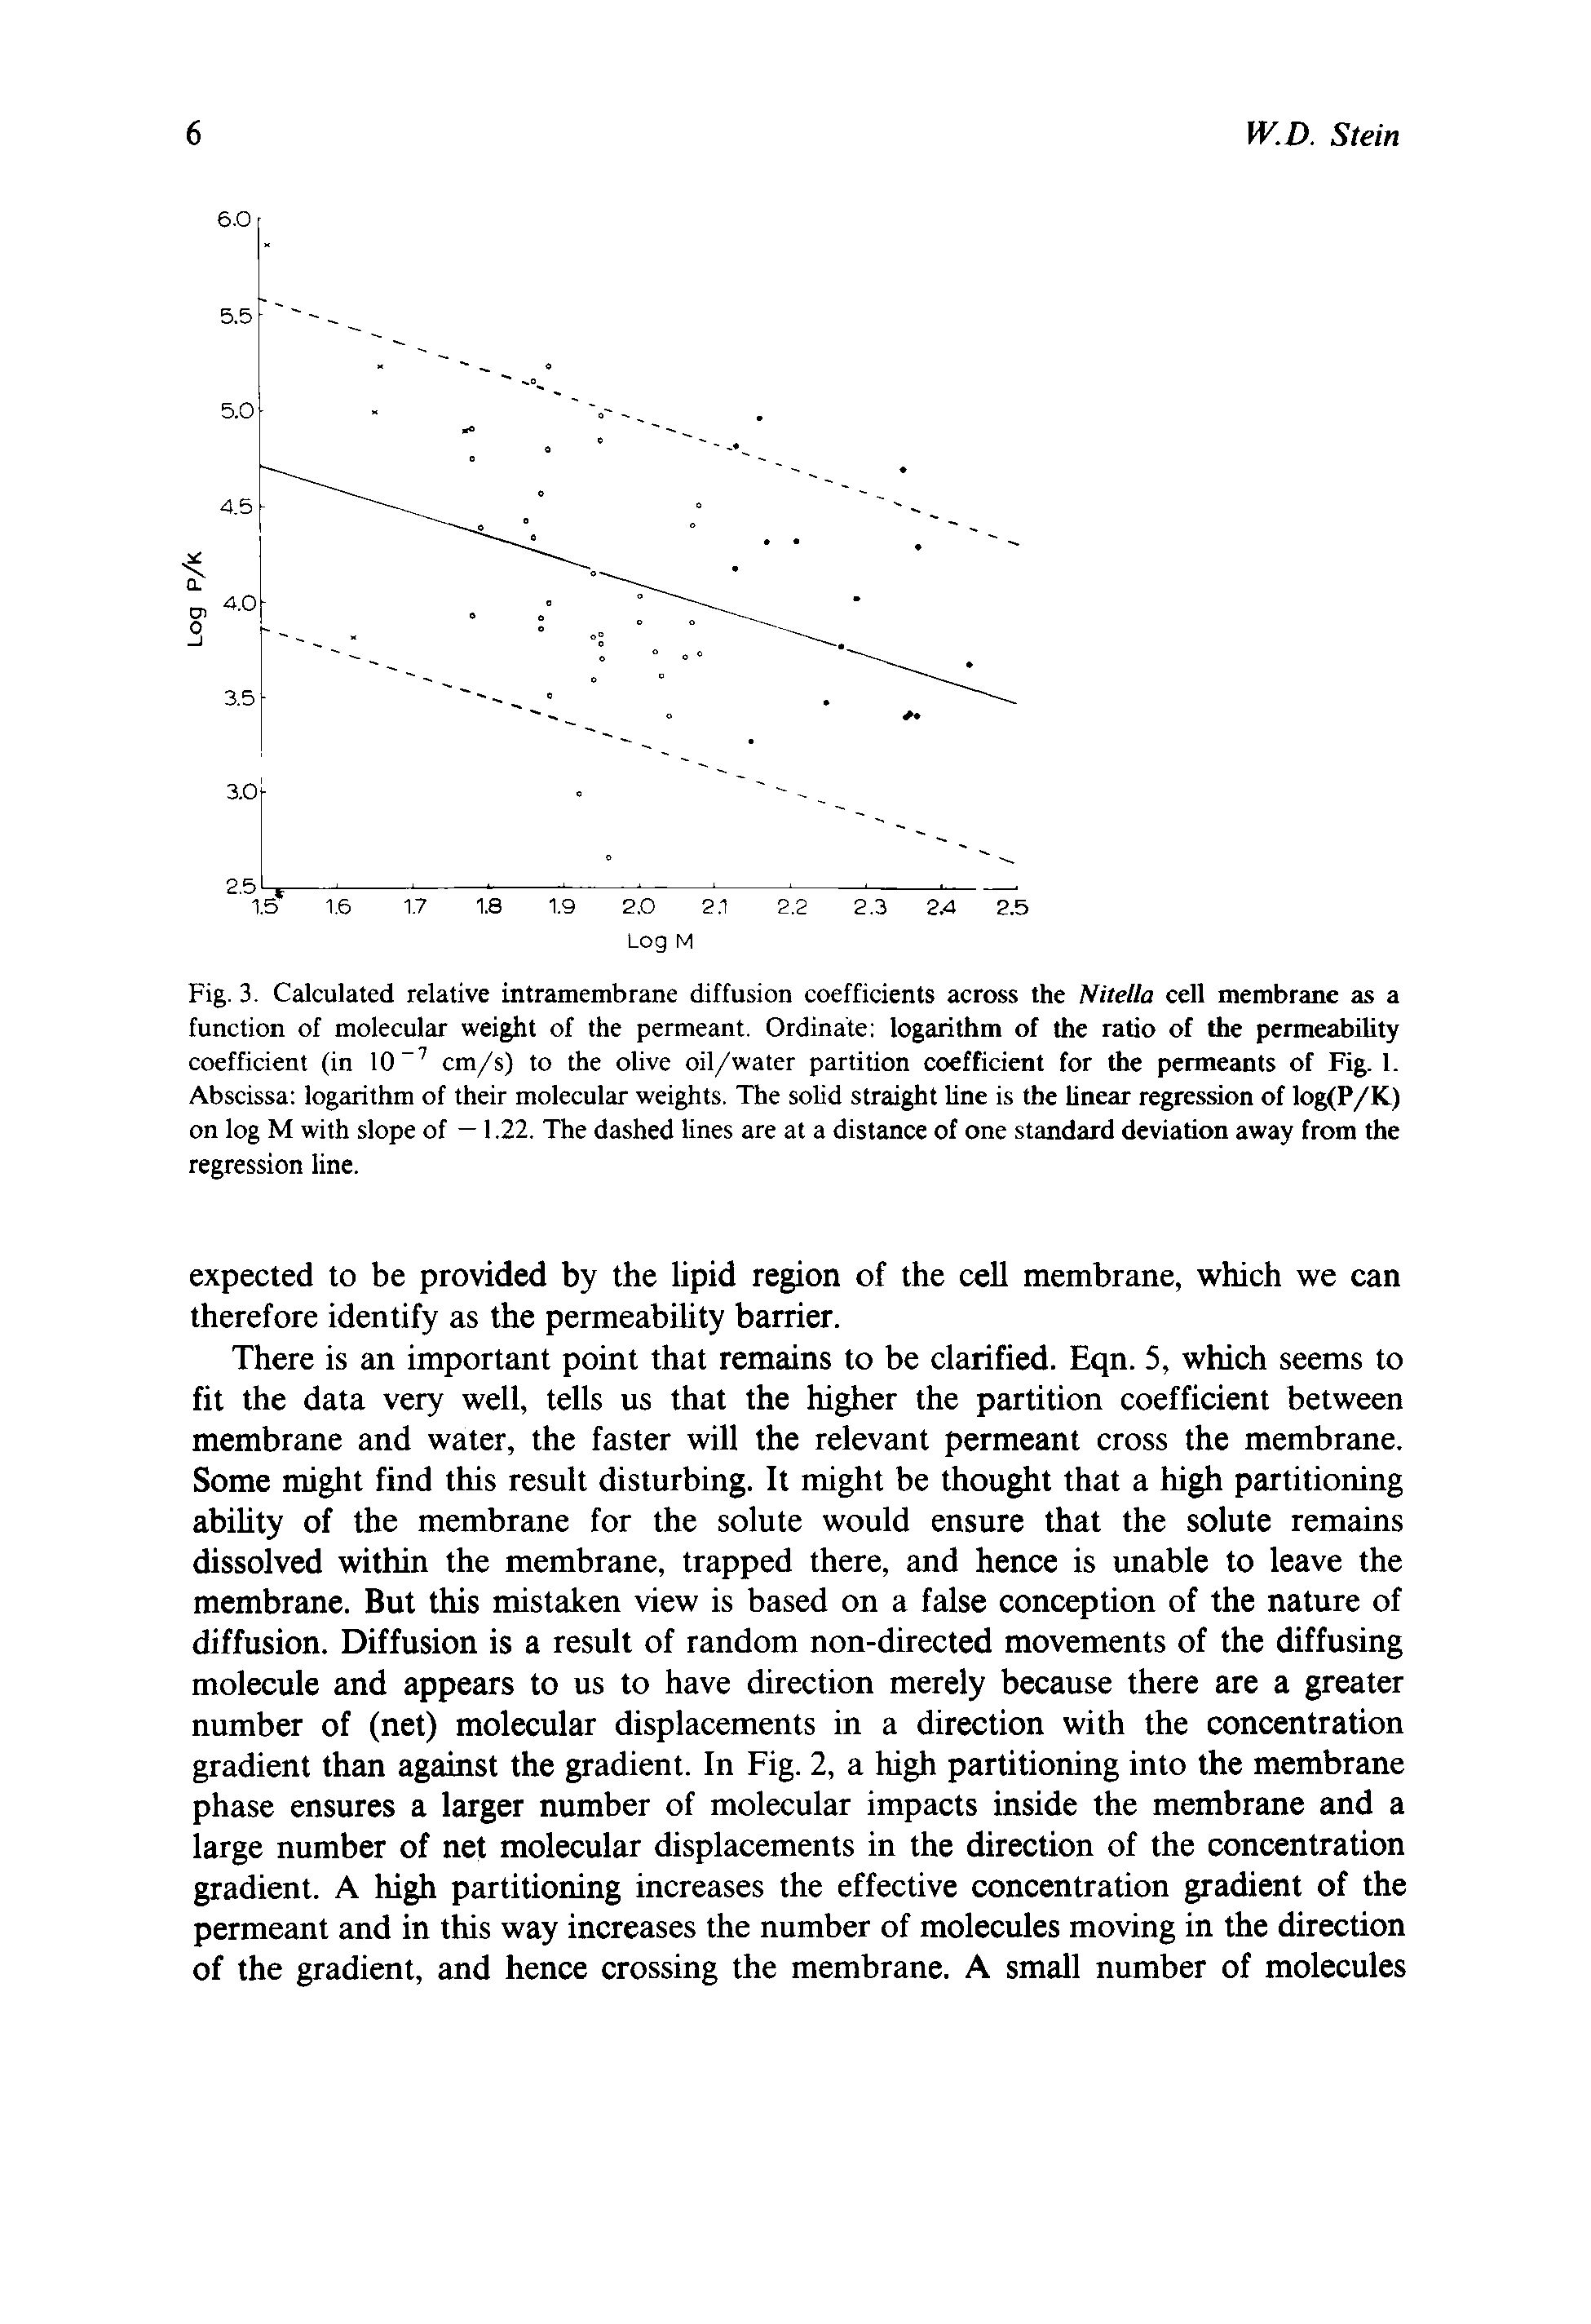 Fig. 3. Calculated relative intramembrane diffusion coefficients across the Nitella cell membrane as a function of molecular weight of the permeant. Ordinate logarithm of the ratio of the permeability coefficient (in 10 cm/s) to the olive oil/water partition coefficient for the permeants of Fig. 1. Abscissa logarithm of their molecular weights. The solid straight line is the Unear regression of log(P/K) on log M with slope of — 1.22. The dashed lines are at a distance of one standard deviation away from the regression line.